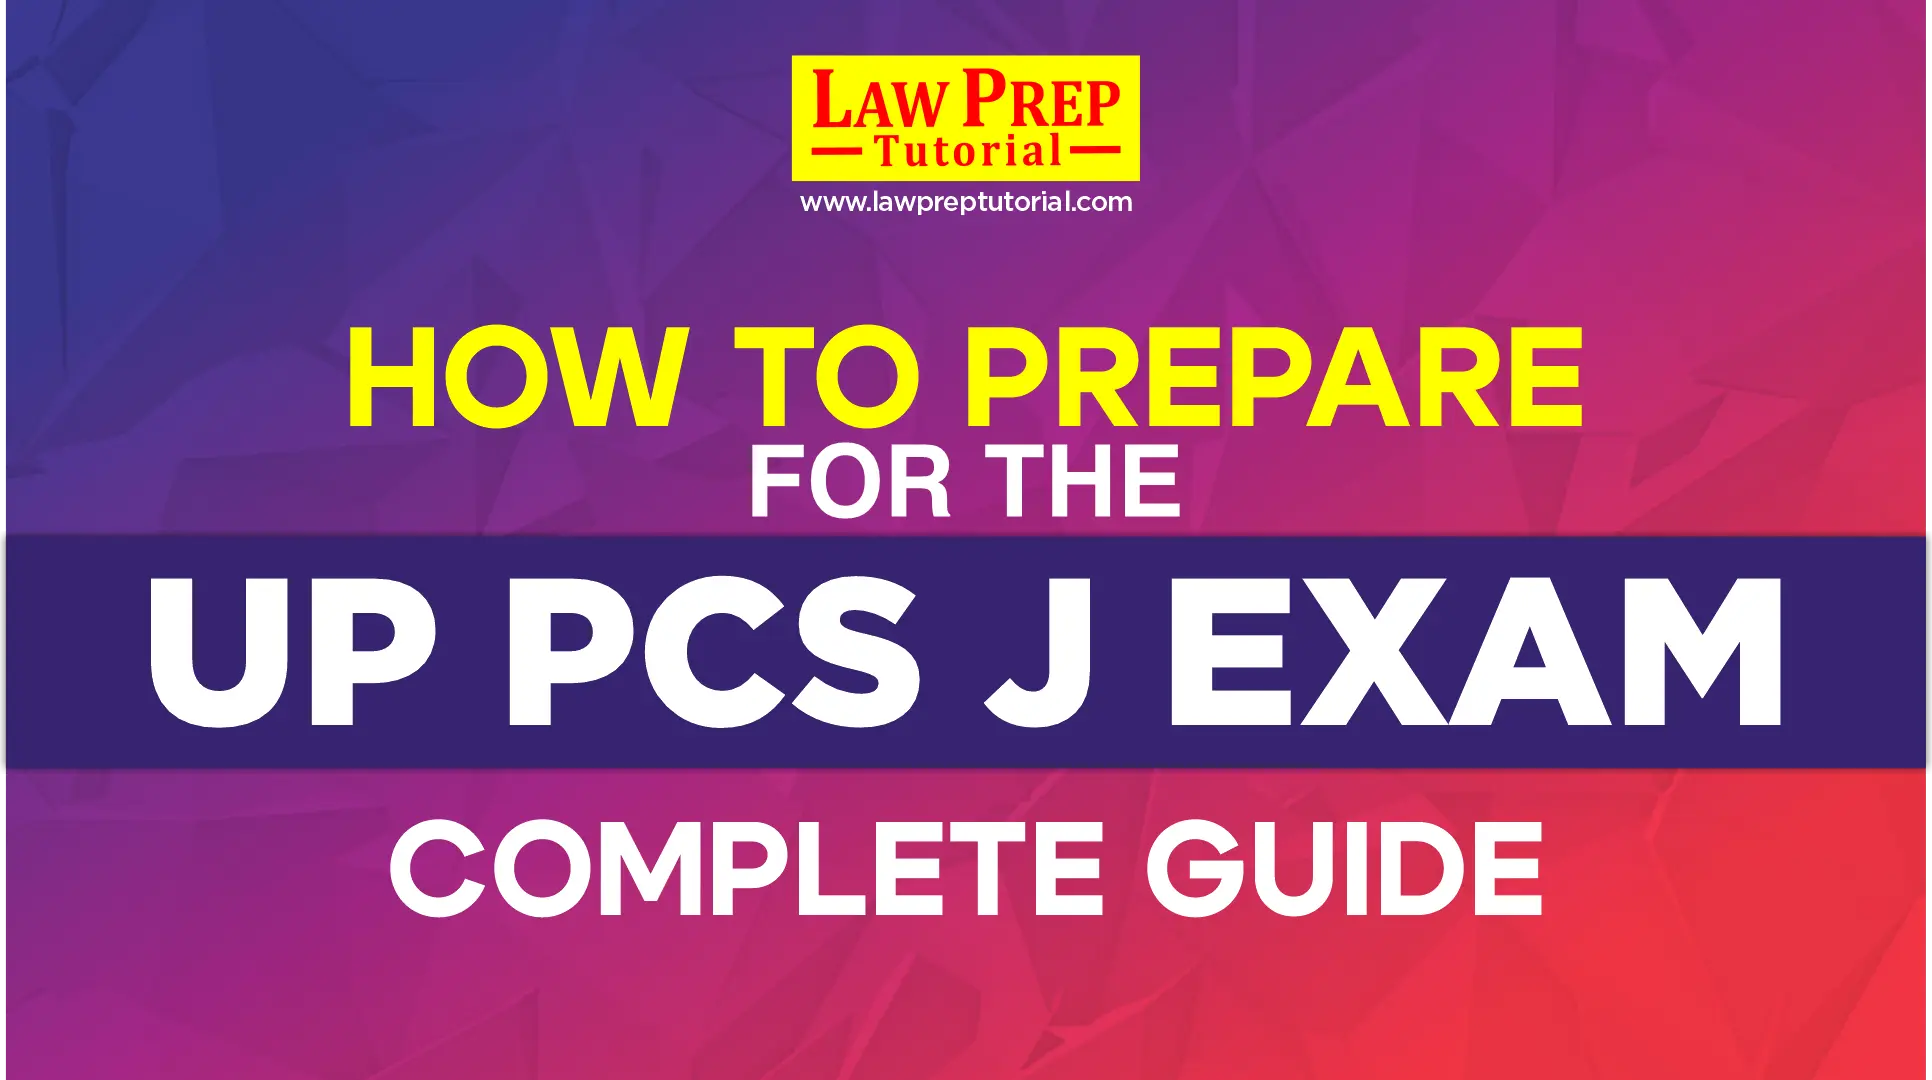 How To Prepare For The UP PCS J Exam?